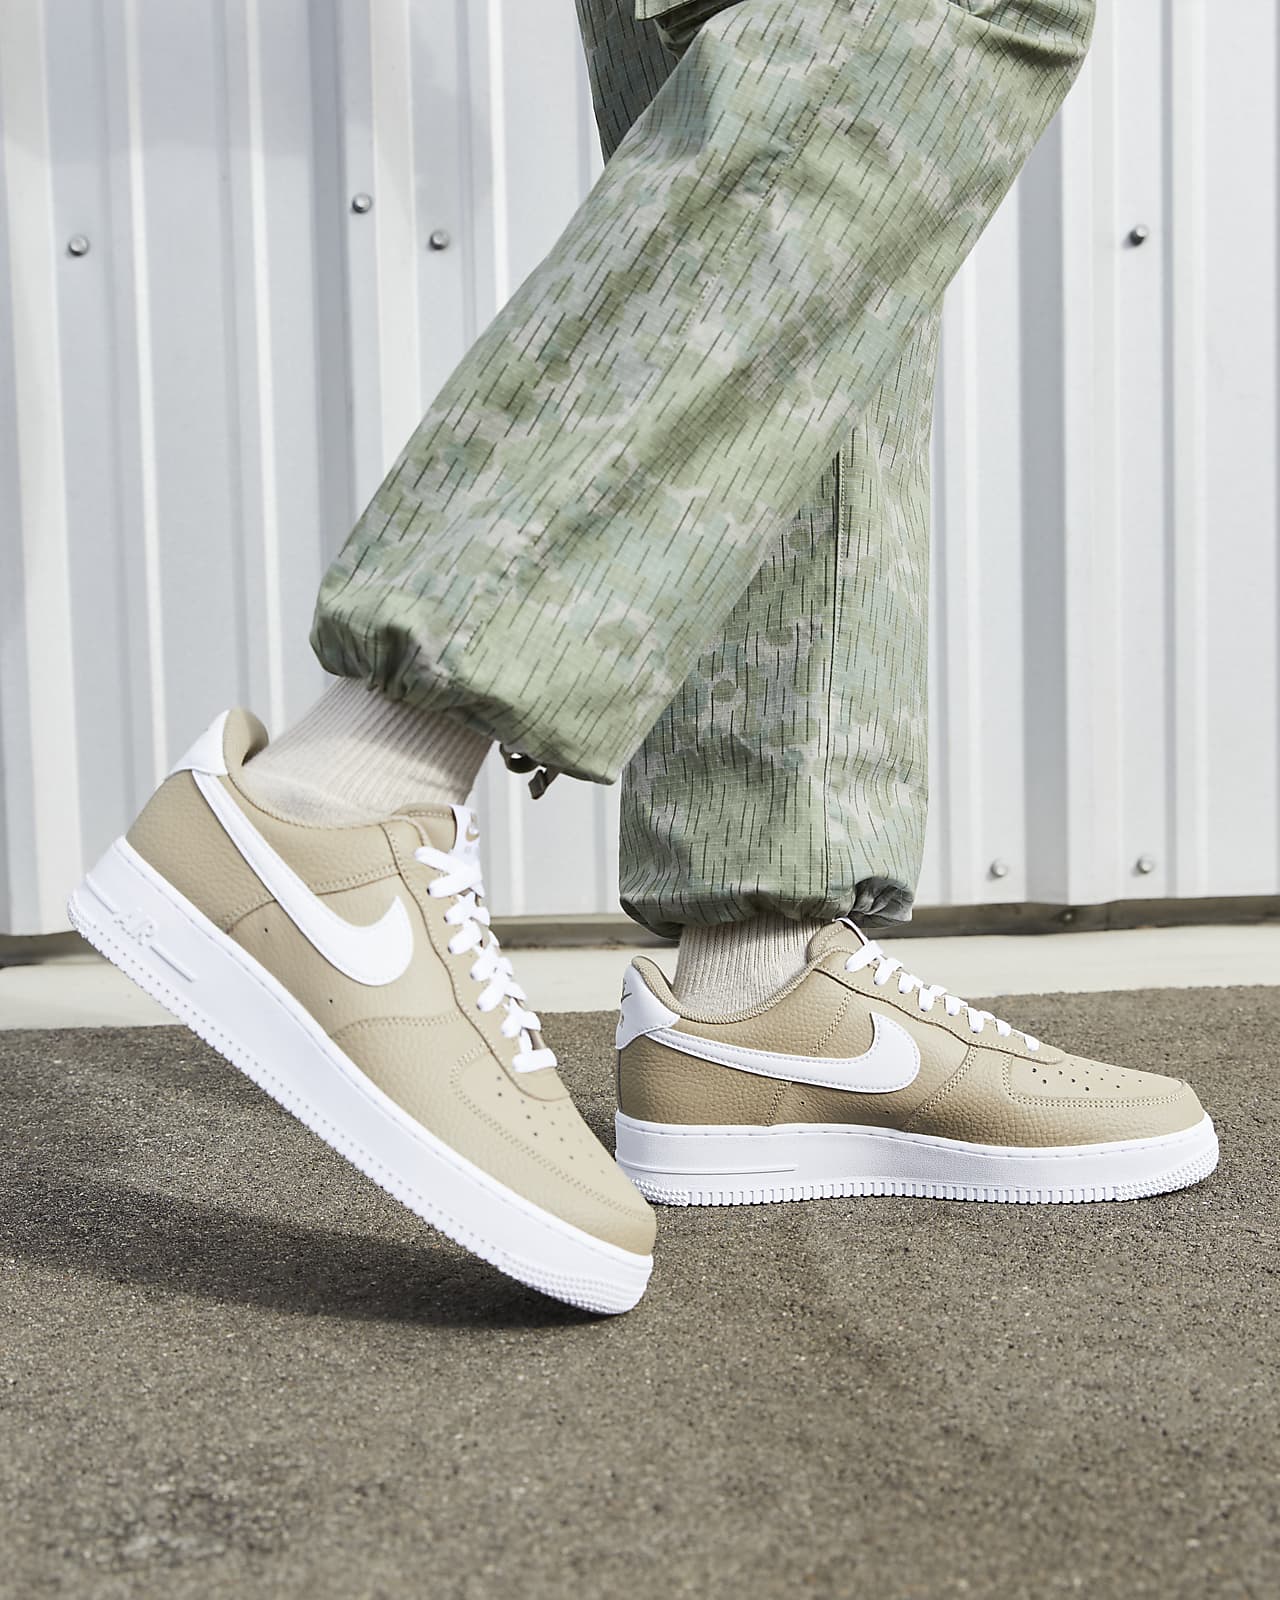 Nike Men's Air Force 1 '07 Casual Shoes